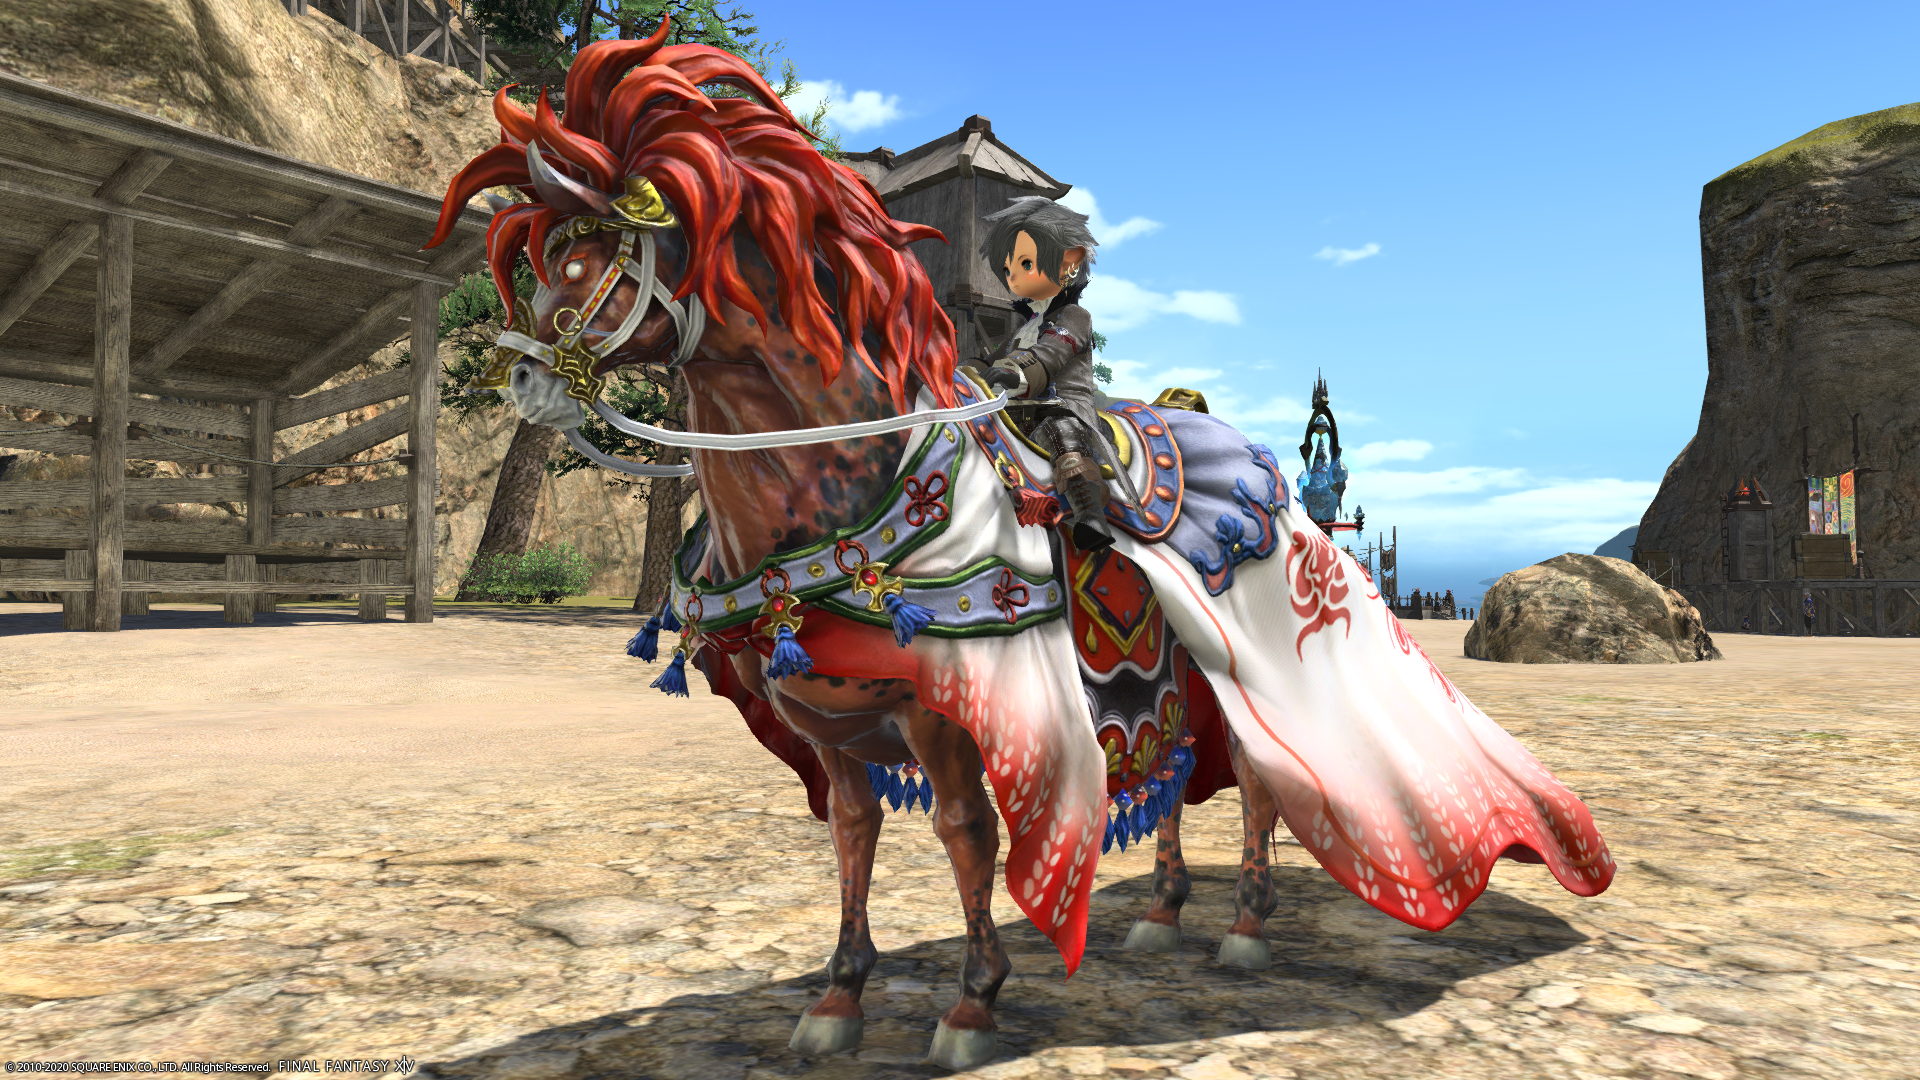 “Red Hare”, which has a red hair color and mounts quick...